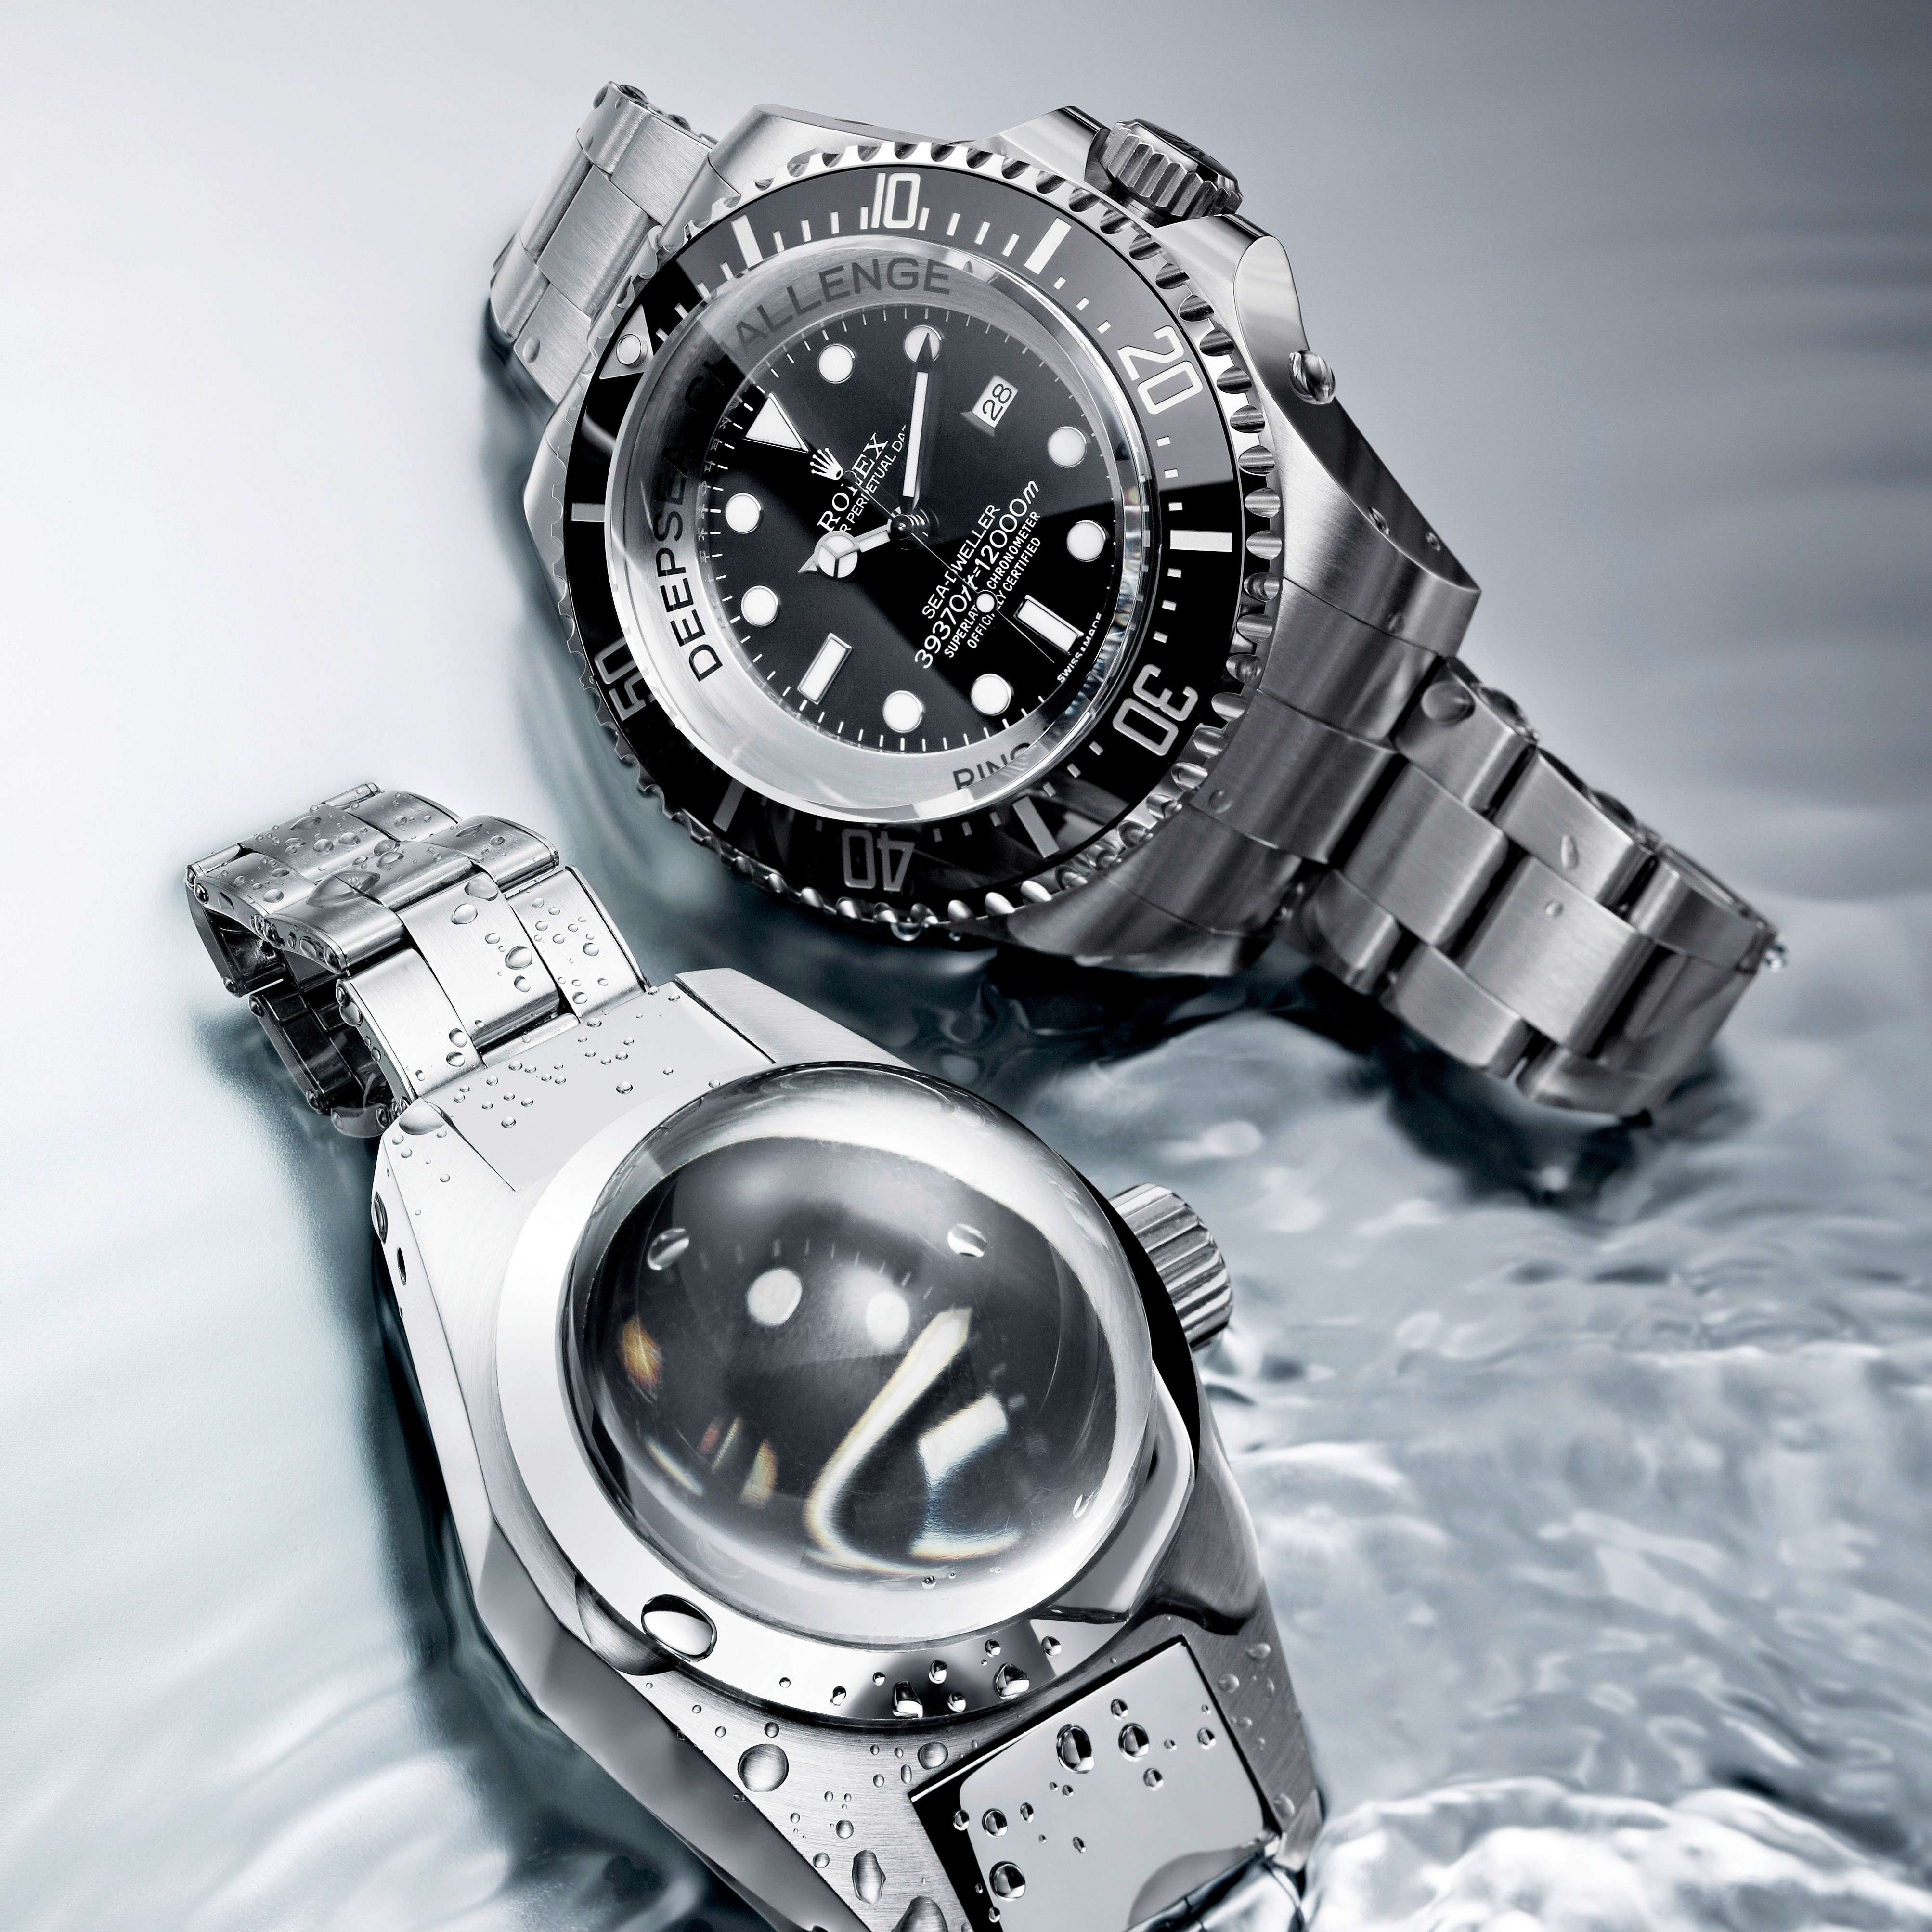 Rolex launched Sea Dweller at Baselworld 2017